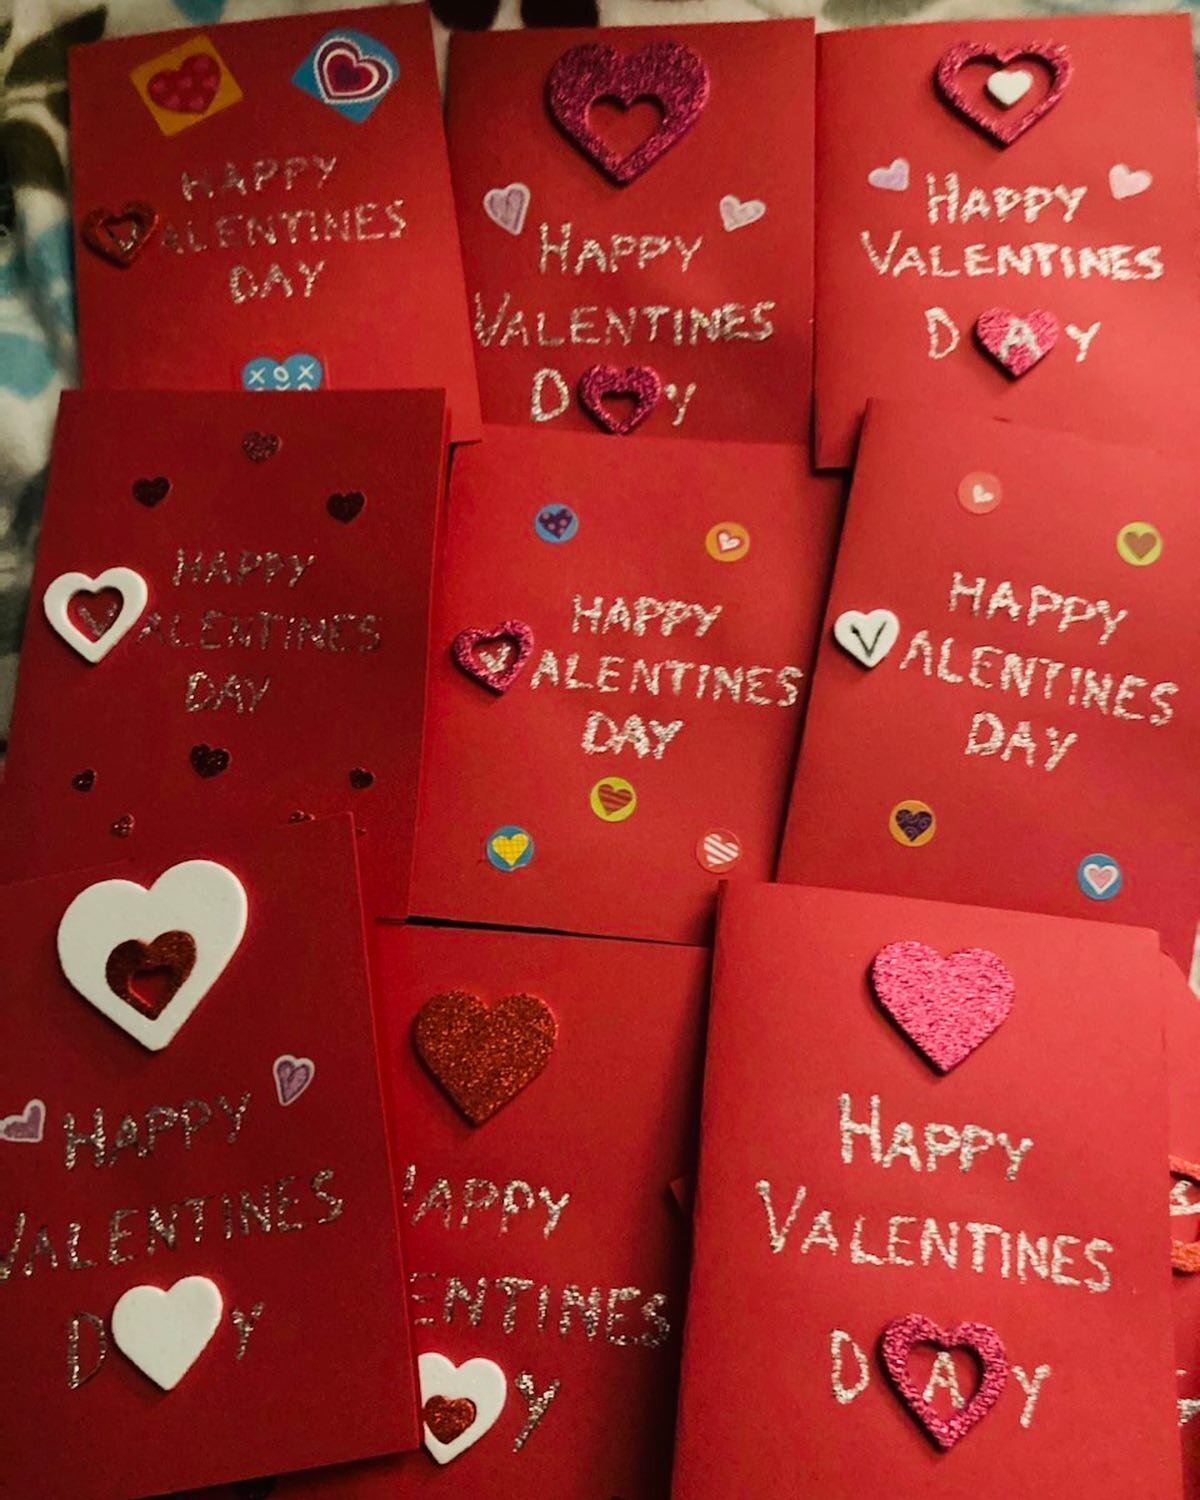 Happy Valentine&rsquo;s Day!❤️🥰Check out these adorable cards for senior centers from our virtual companionship team!